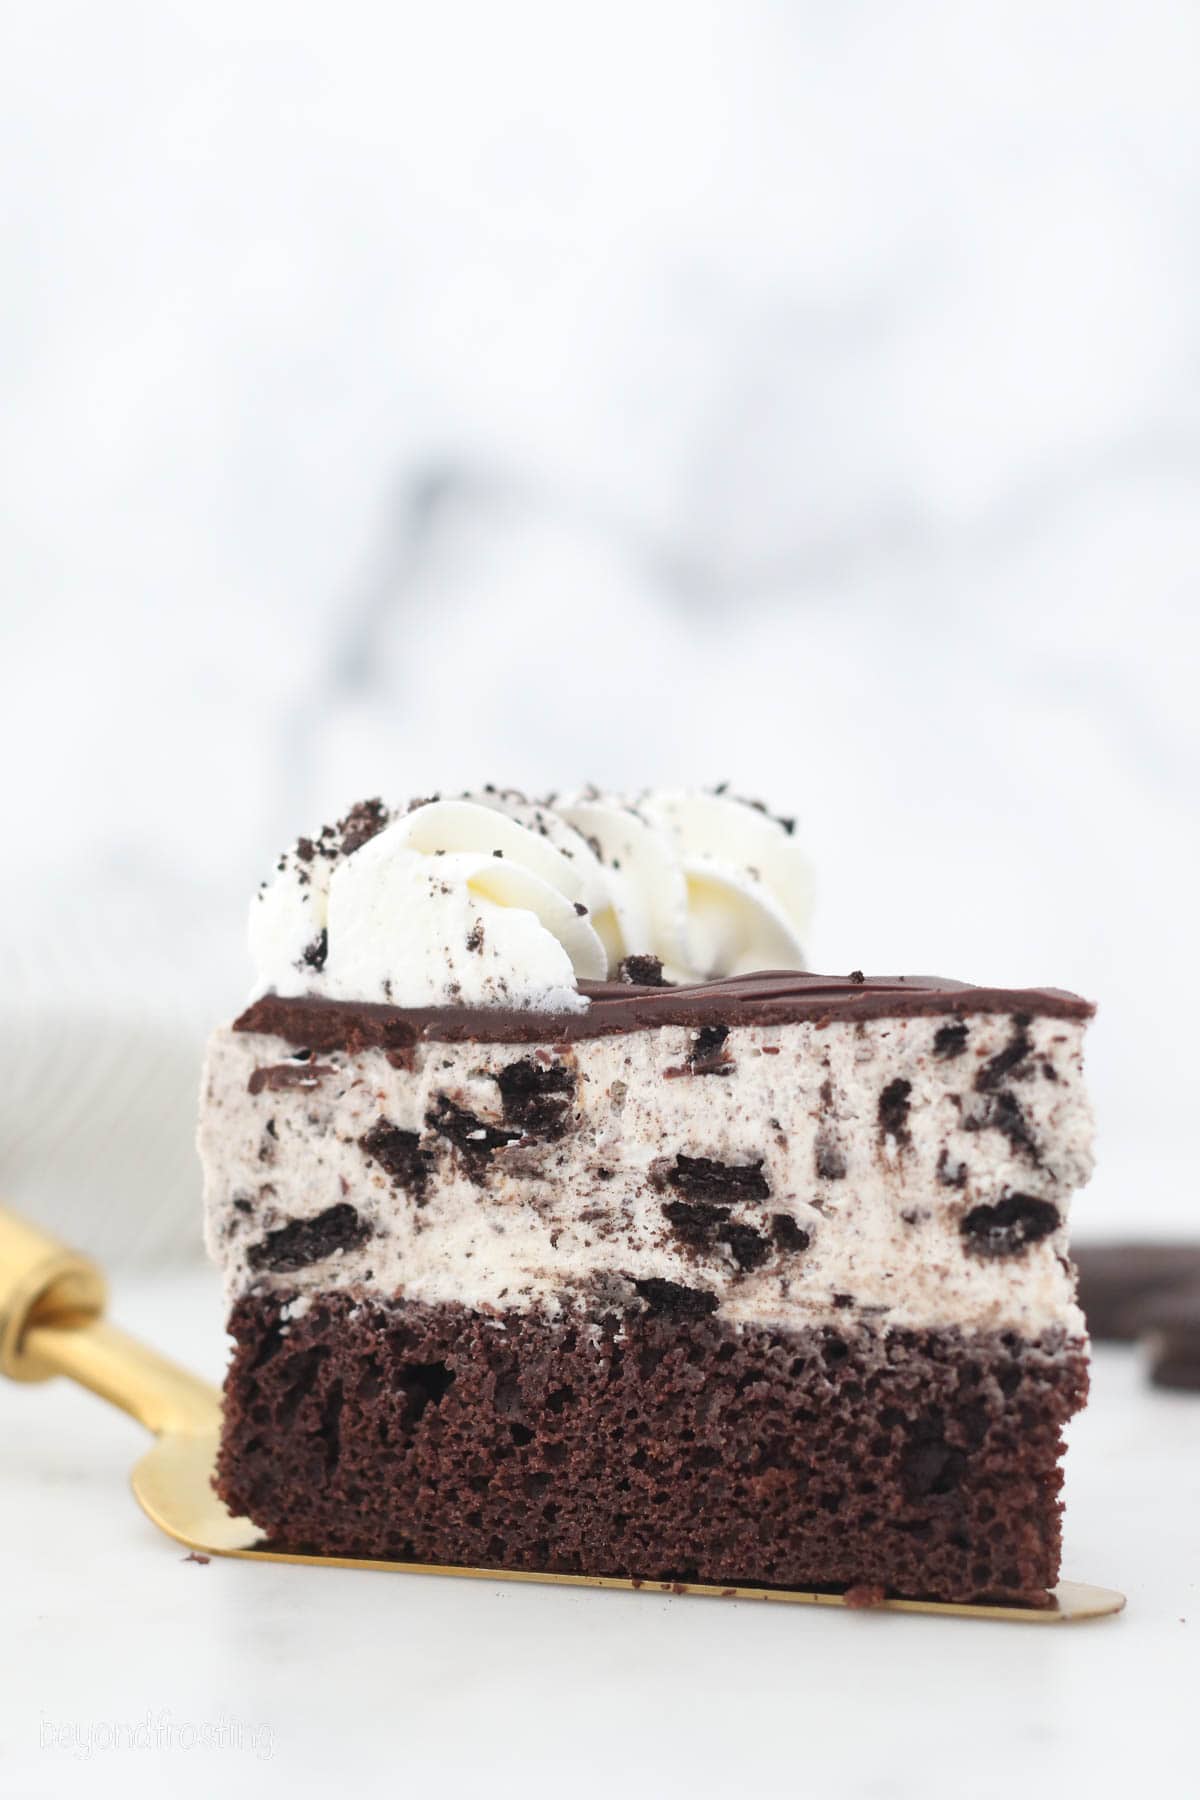 A slice of Oreo ice cream cake topped with whipped cream.